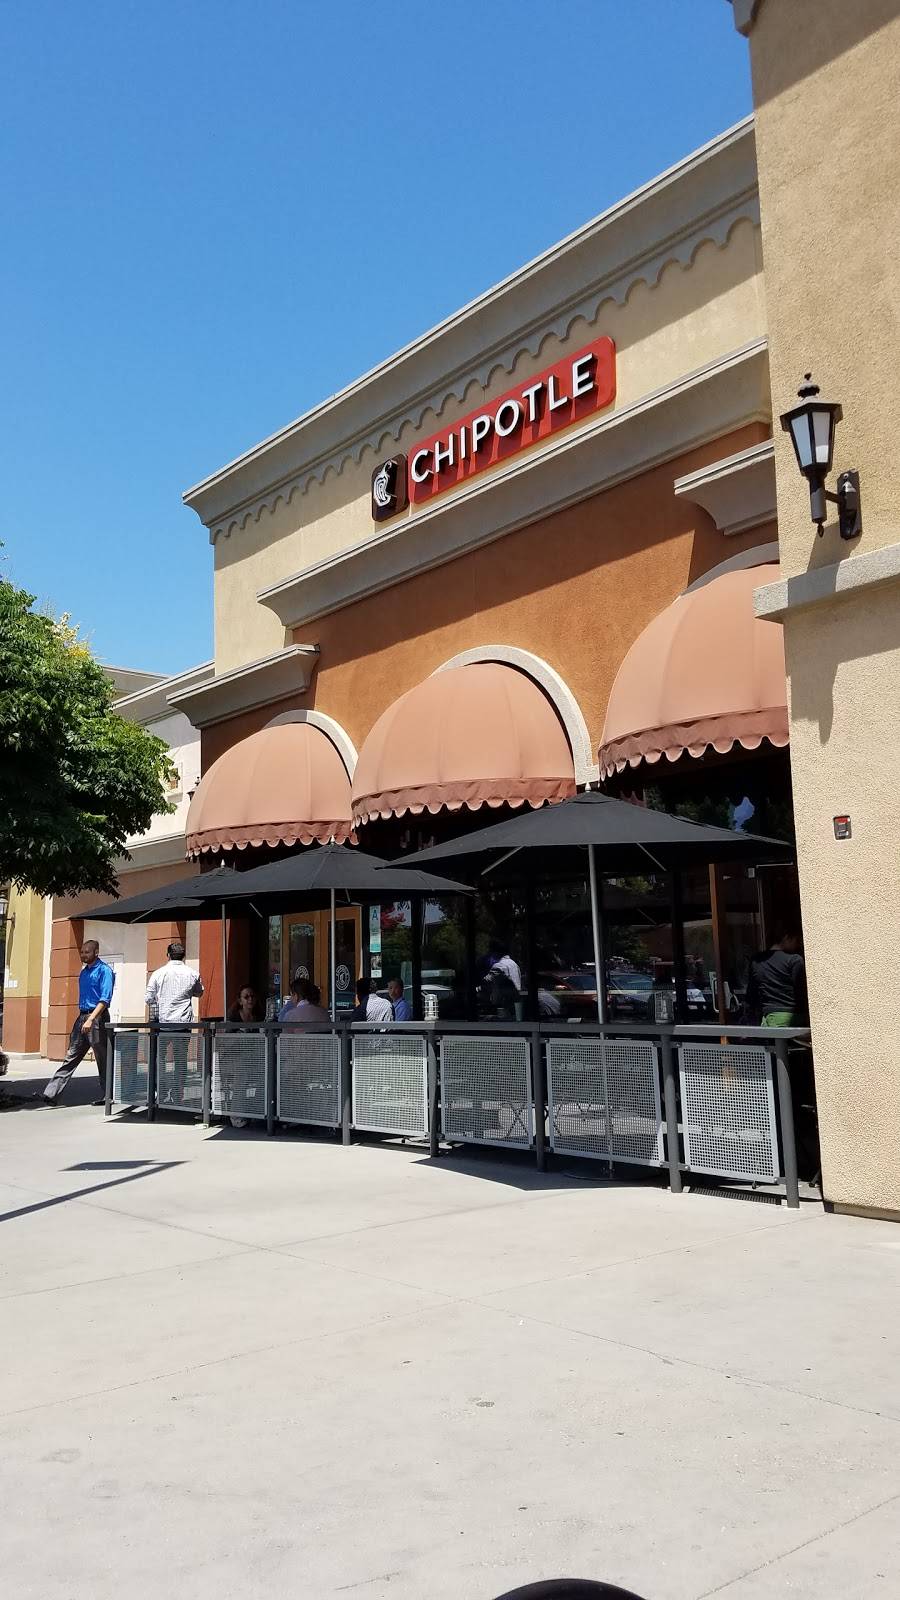 Chipotle Mexican Grill | restaurant | 2121 W Main St Ste 210, Alhambra, CA 91801, USA | 6262845509 OR +1 626-284-5509